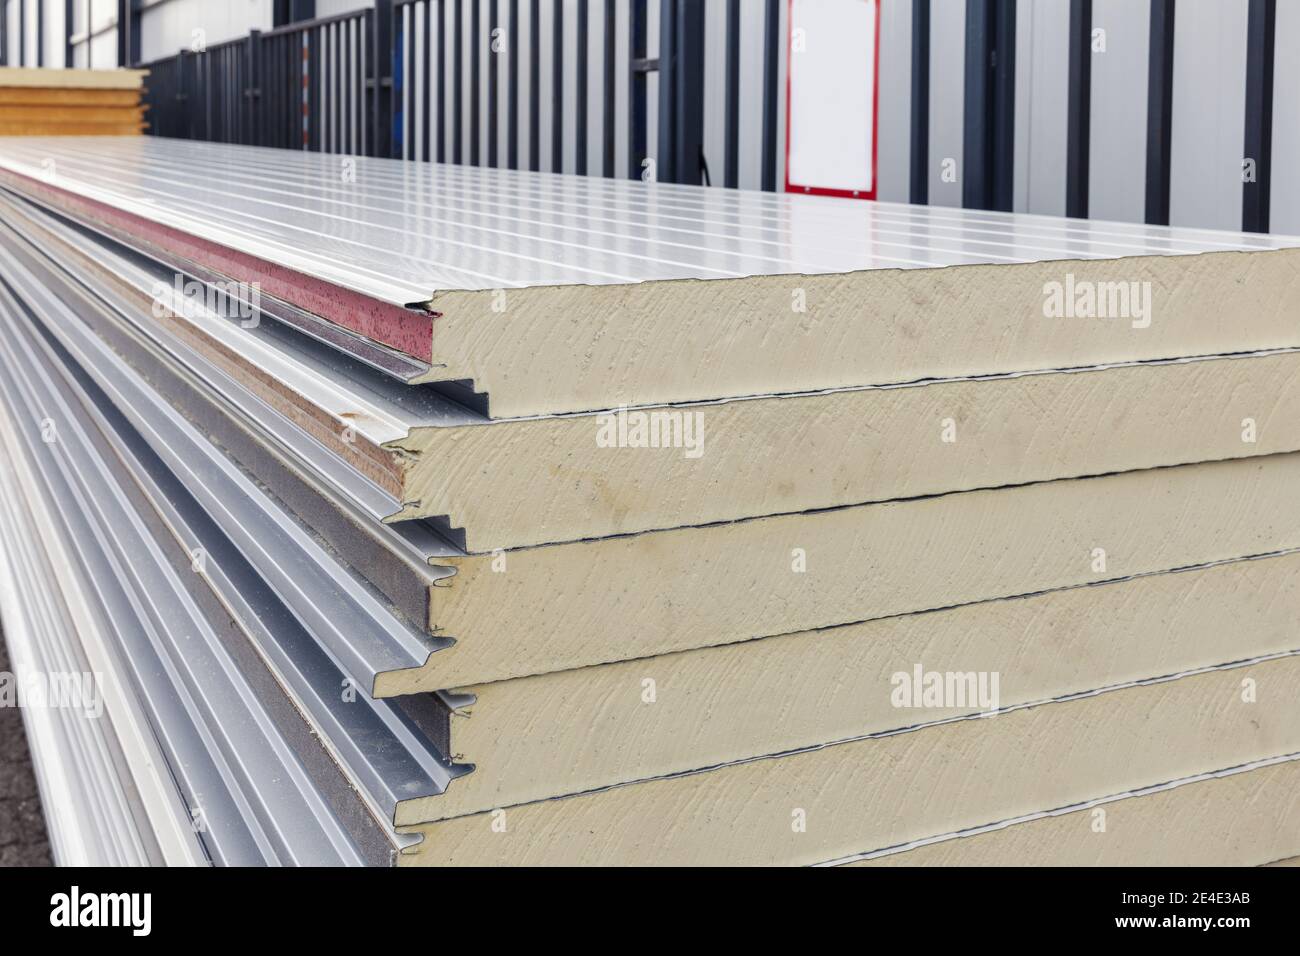 insulation panels on piles, close up Stock Photo